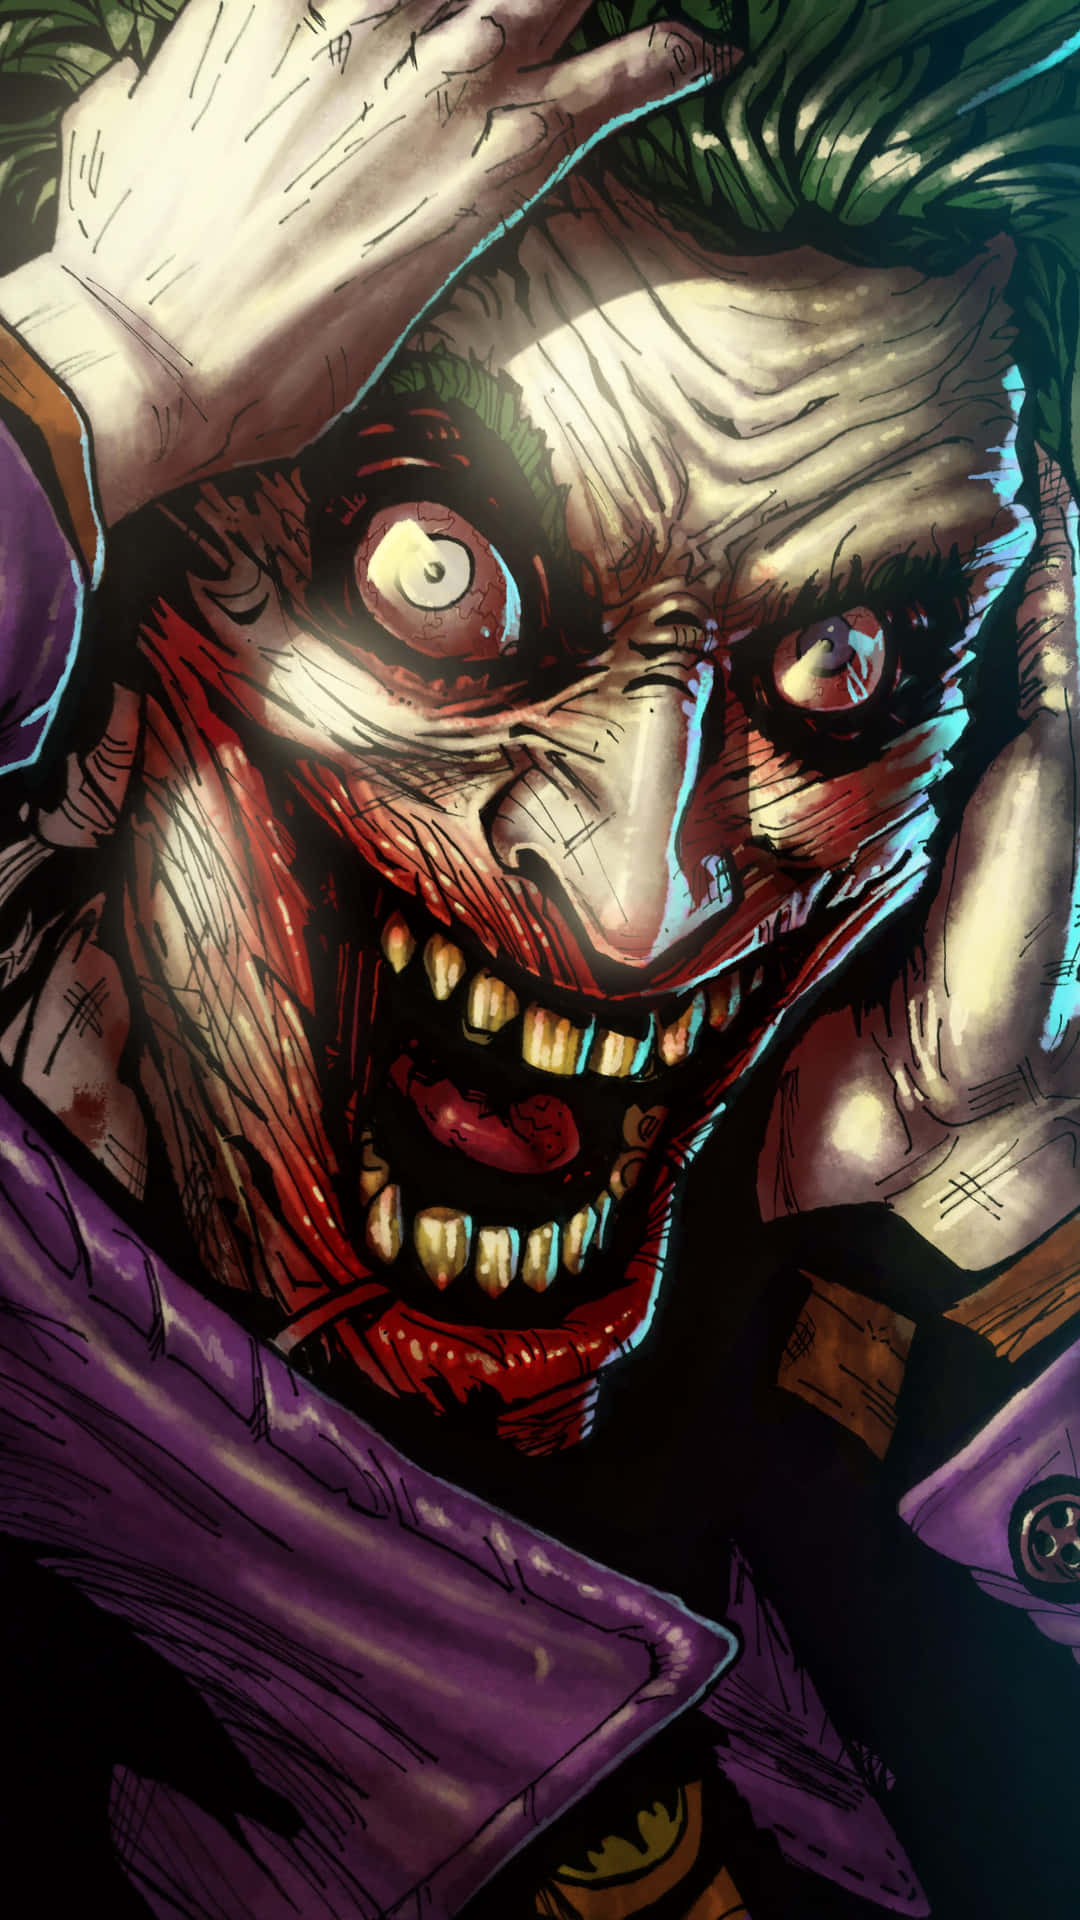 Maniacal Joker Laughing In Vibrant Colors